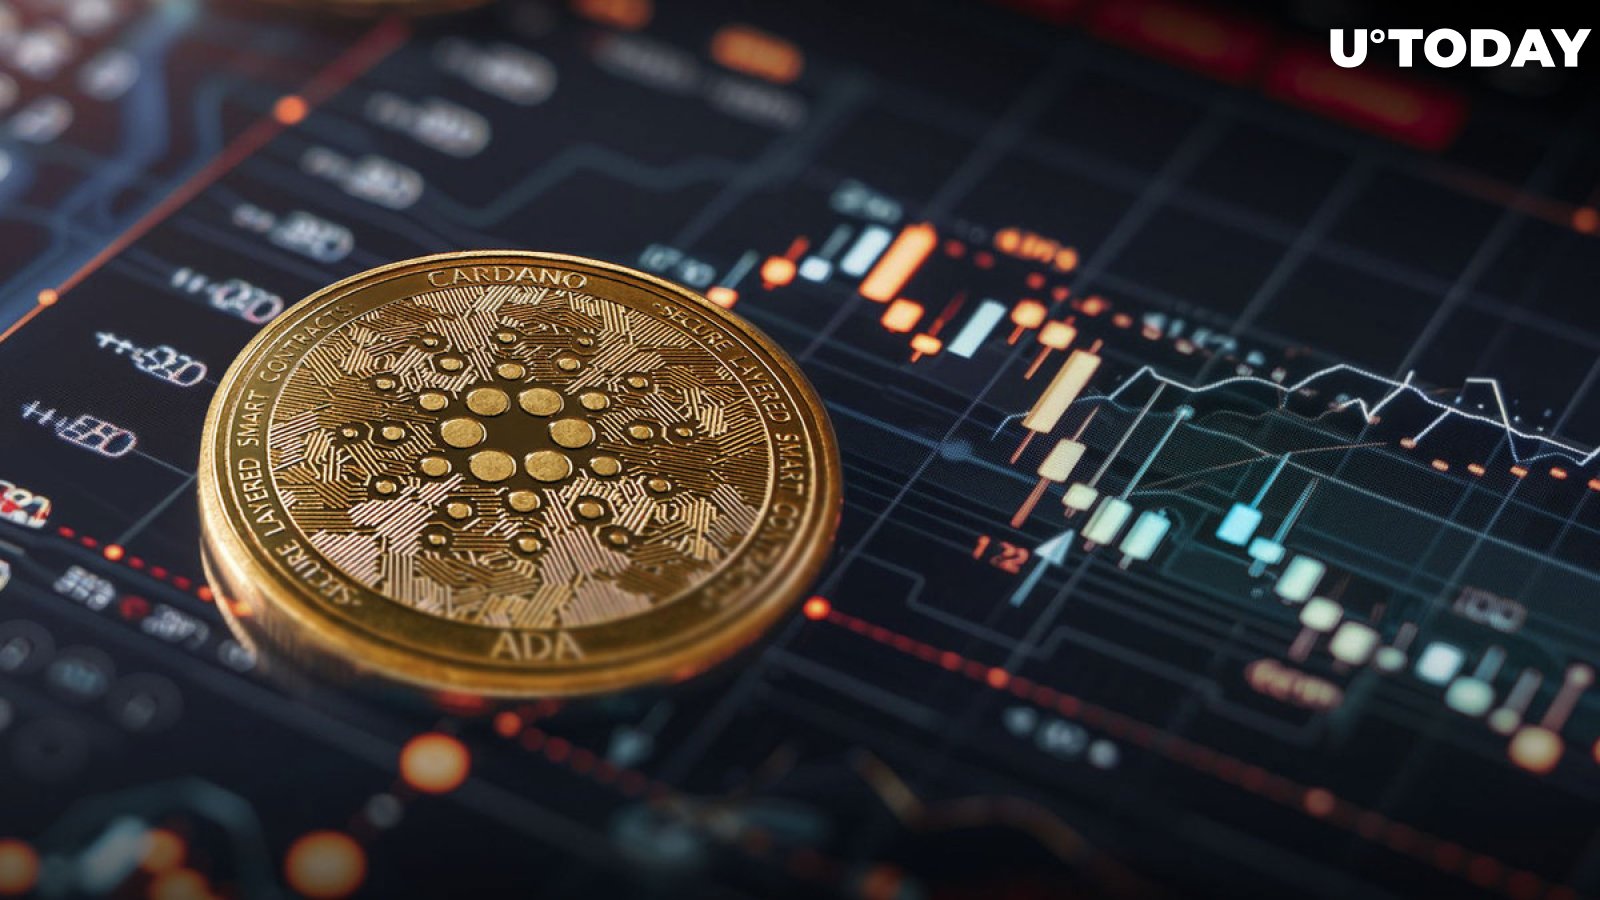 Will Cardano (ADA) Recover Back to $0.5? 